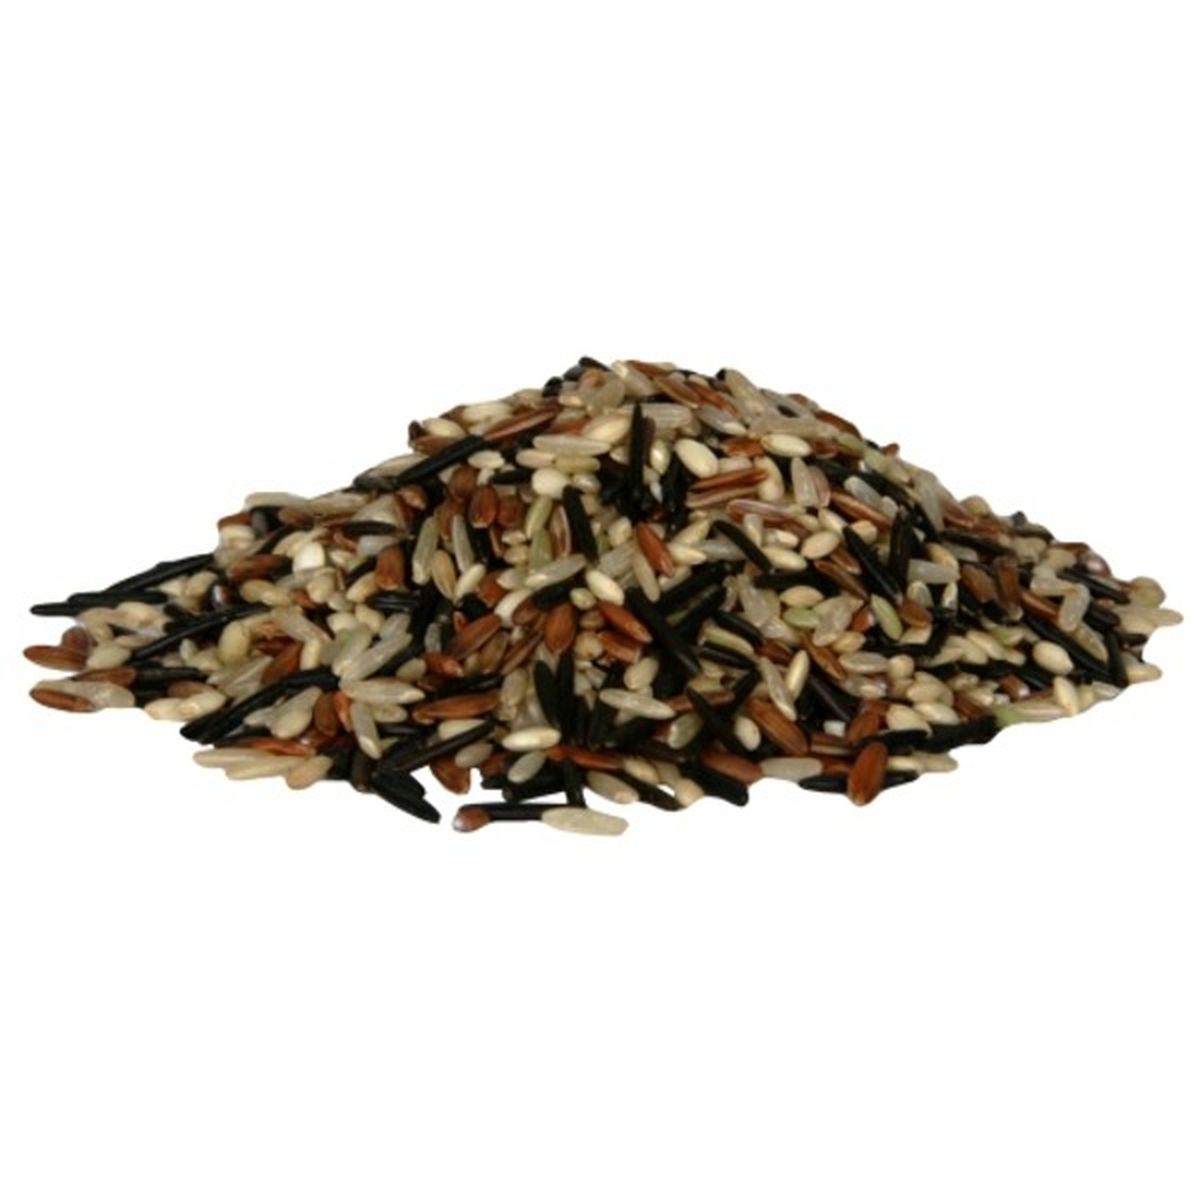 Calories in United Natural Foods Inc Organic Wild Rice Blend